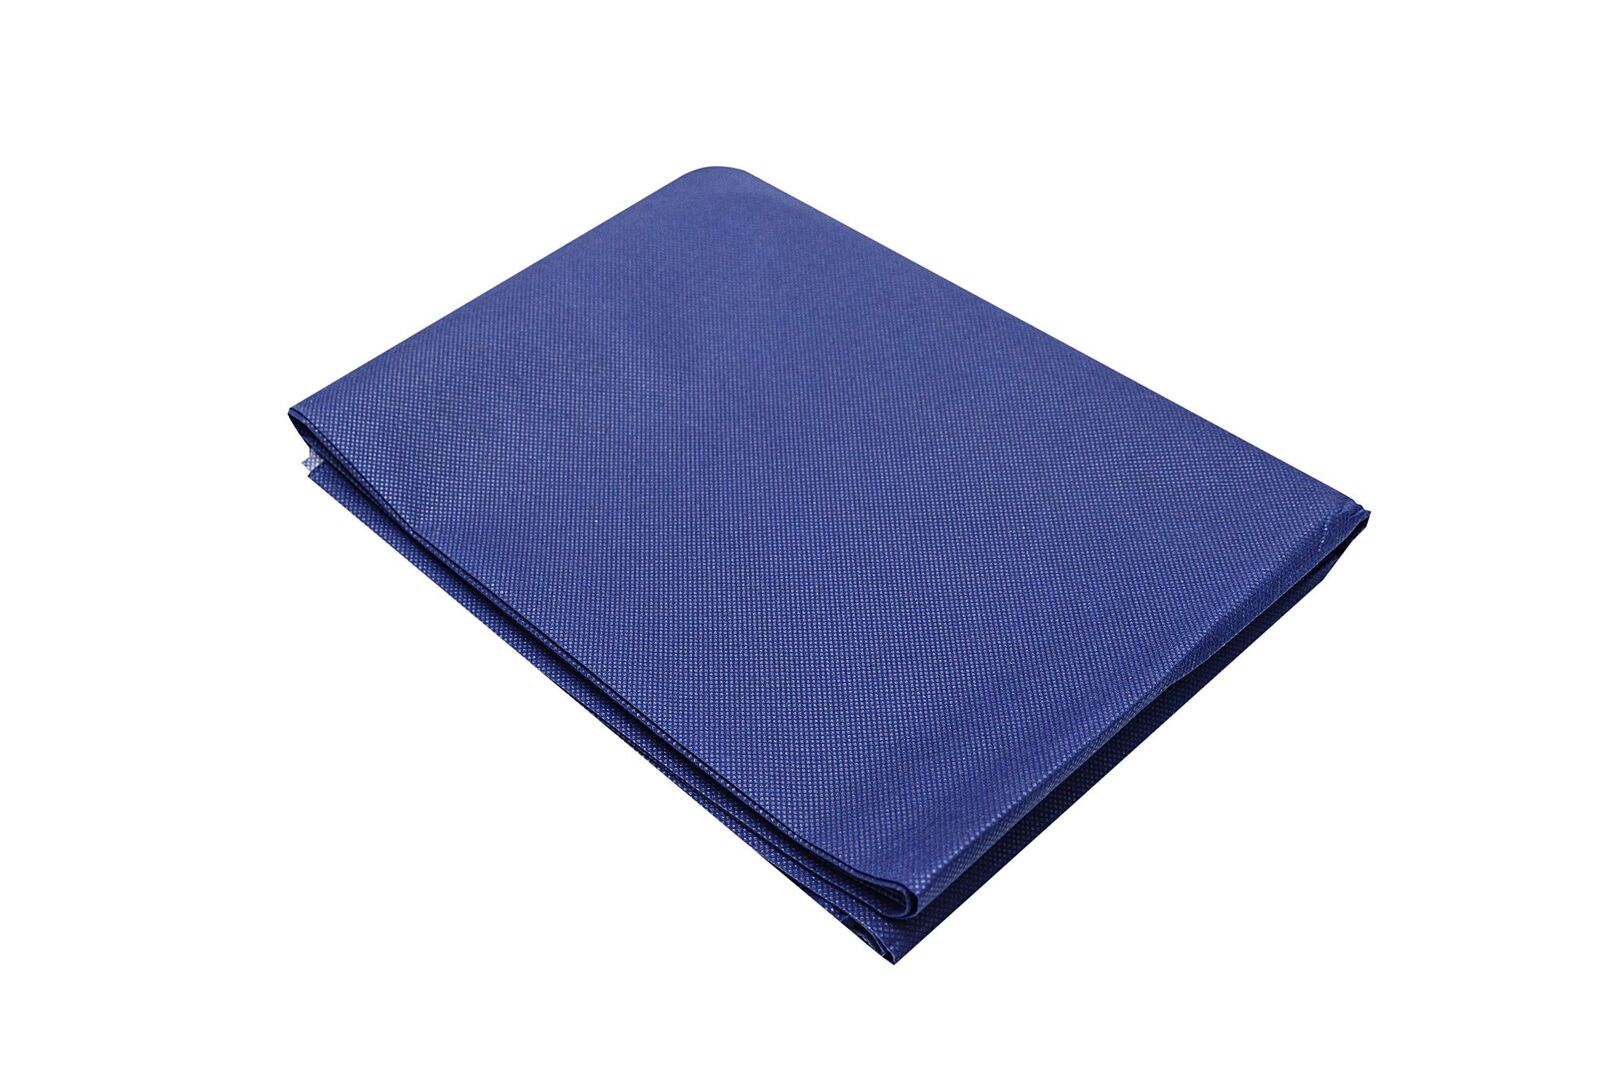 200 x 100cm, 100Stück/VE 
60 g/m² PP-fleece, 35 g/m² PE,
extra strong

10 pieces packed in a polybag